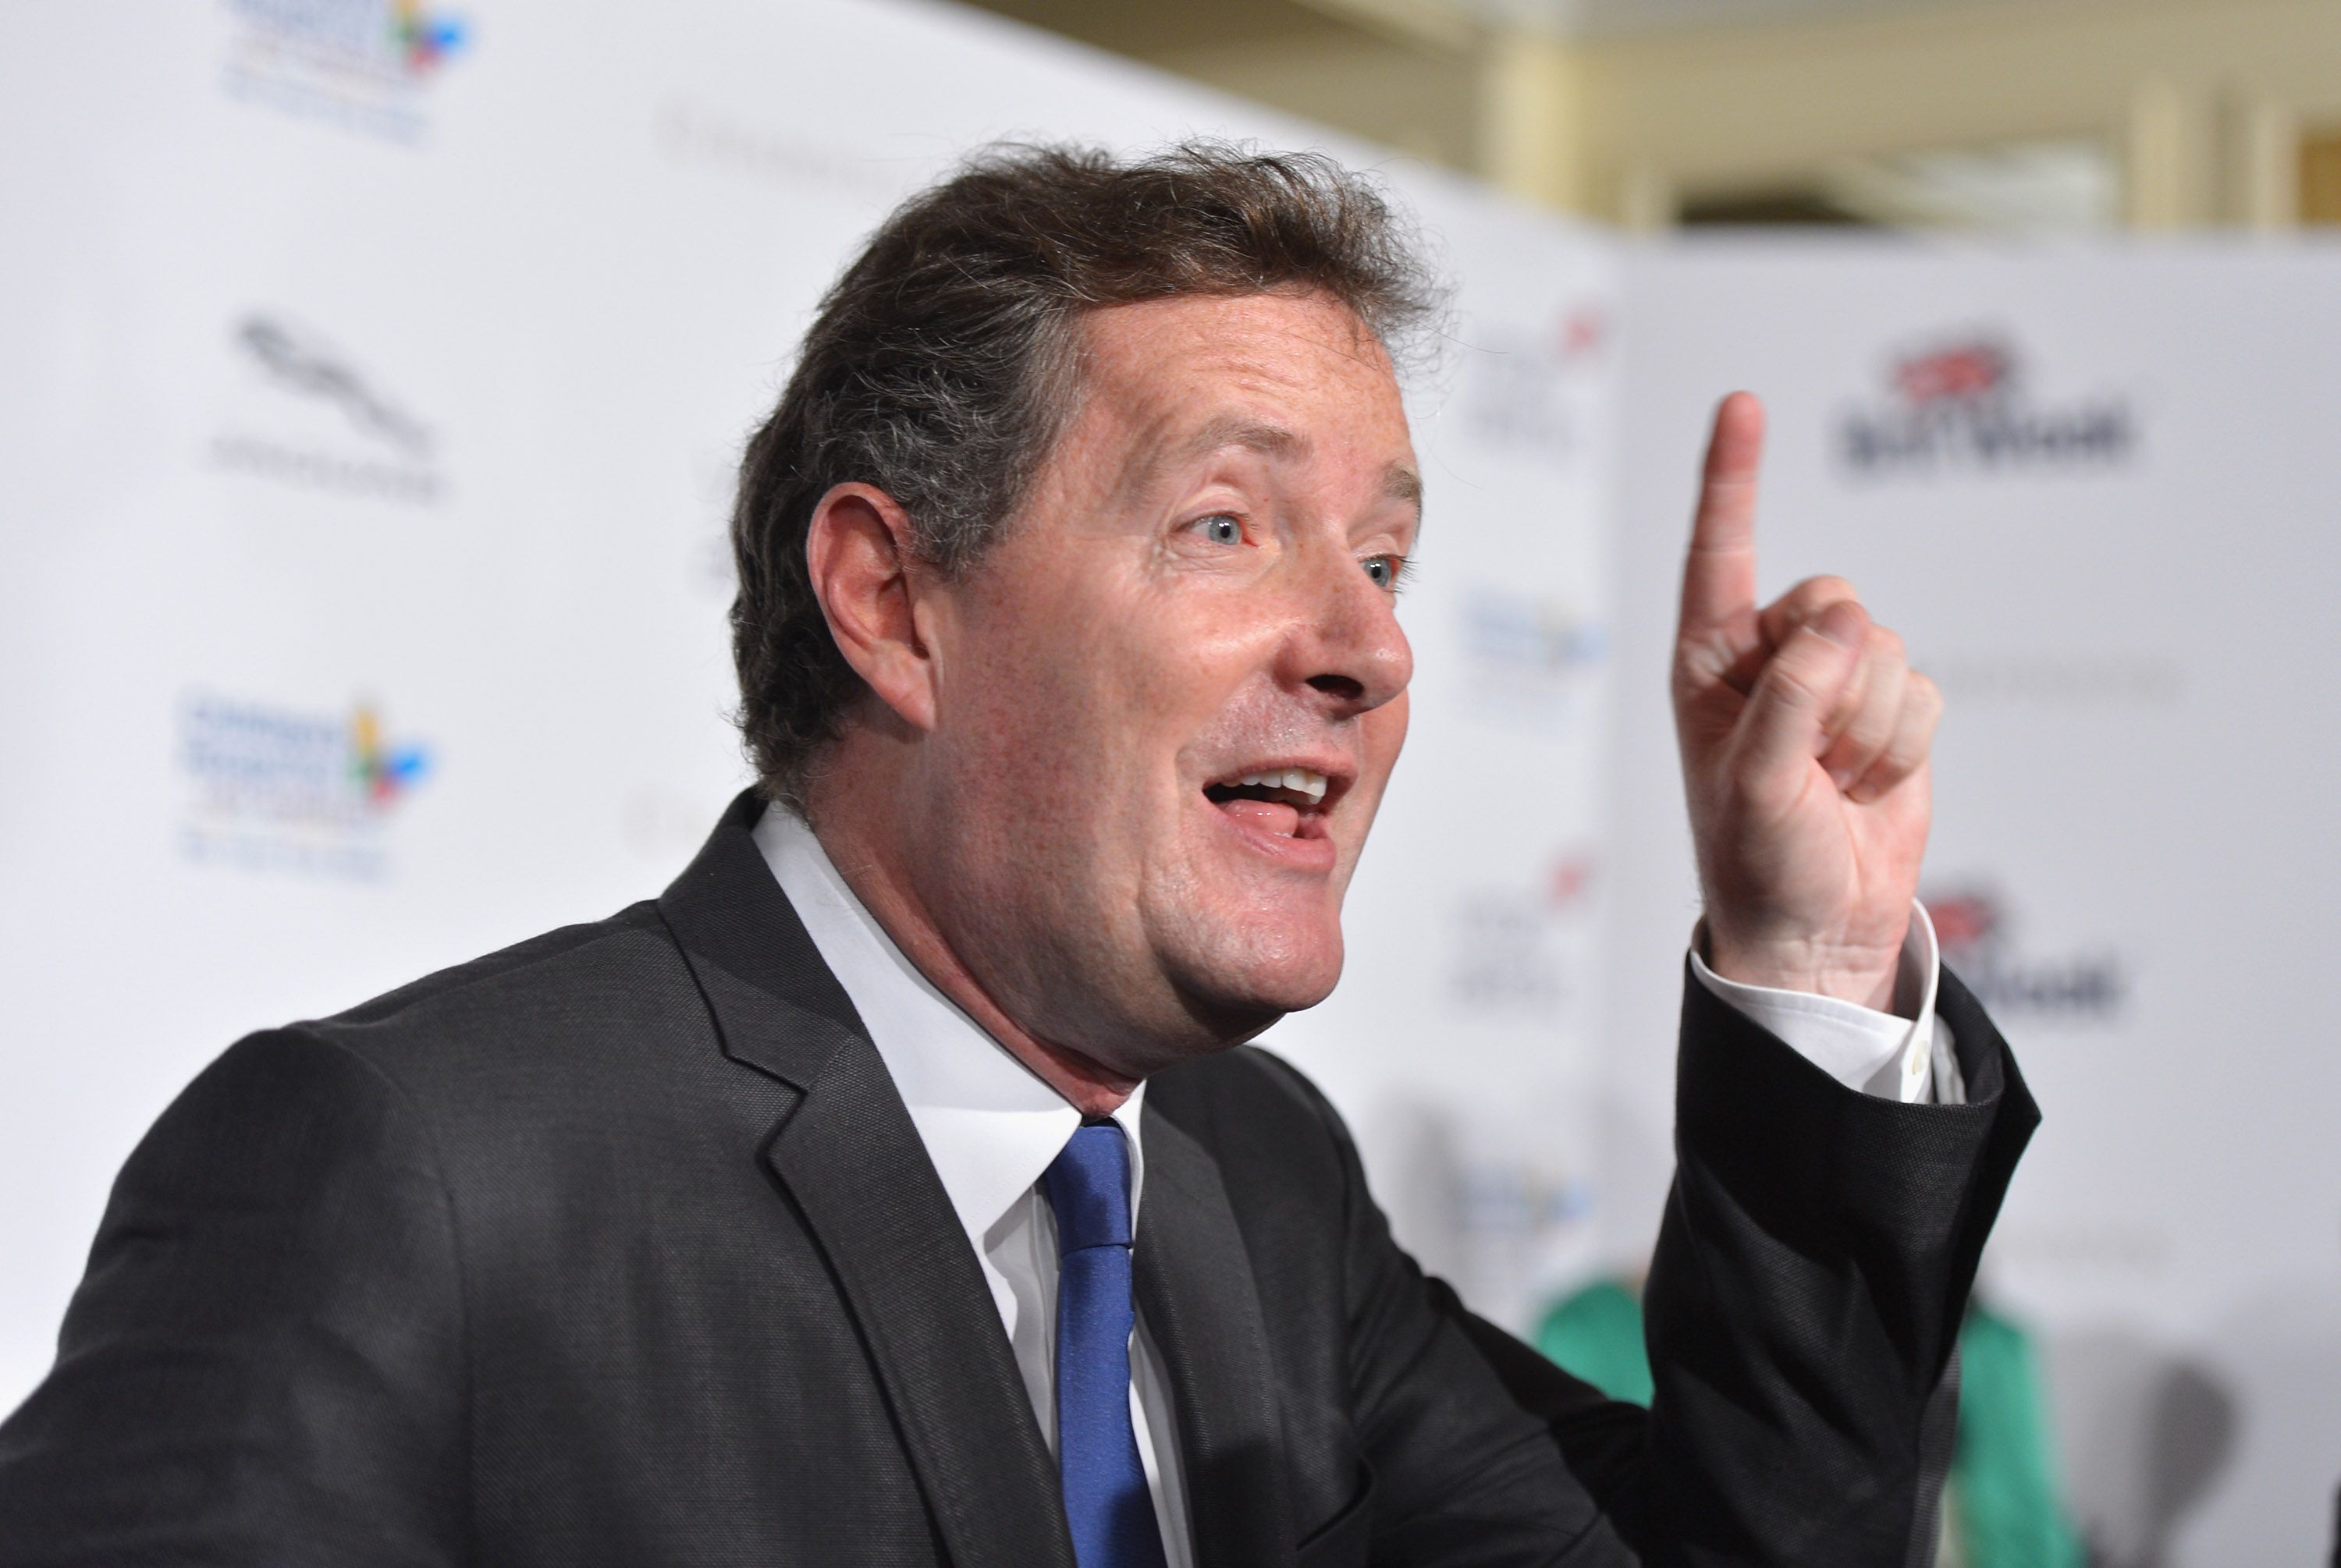 Piers Morgan at BritWeek 2012's "Evening with Piers Morgan" on May 4, 2012 | Photo: Getty Images